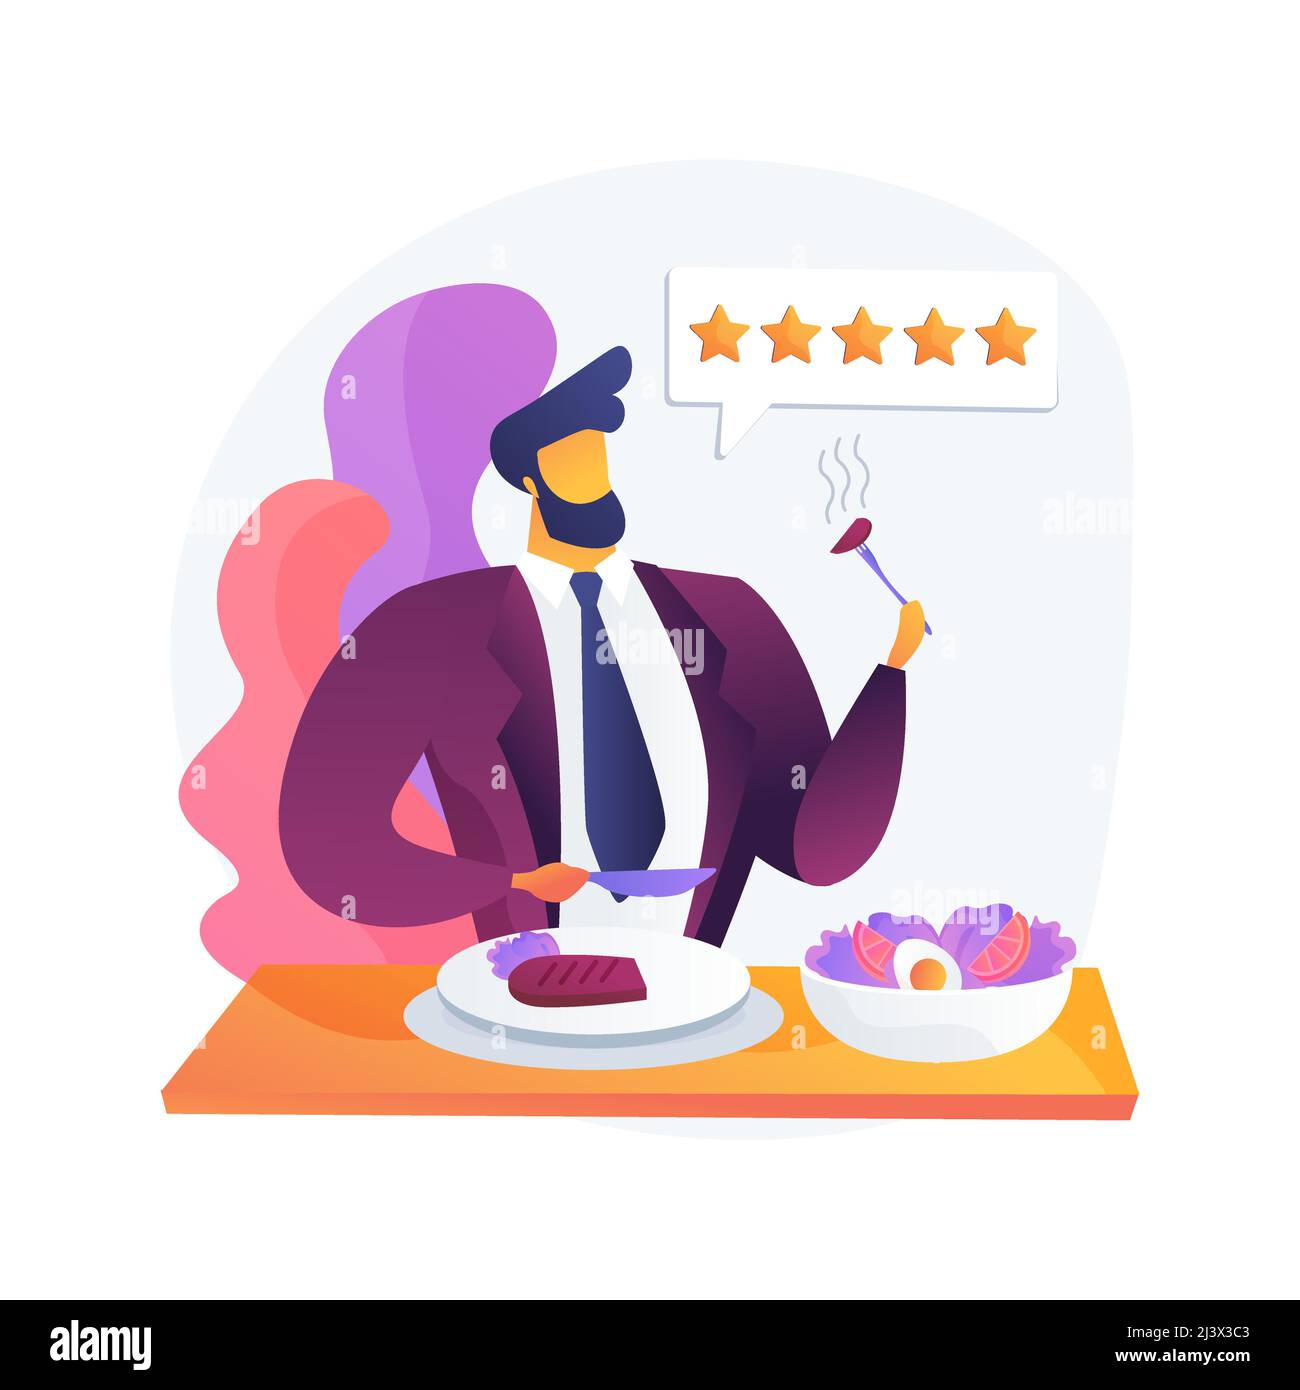 Food critic abstract concept vector illustration. Analyze food, restaurant chef, write review, rating, expert opinion, culinary show, undercover guest Stock Vector